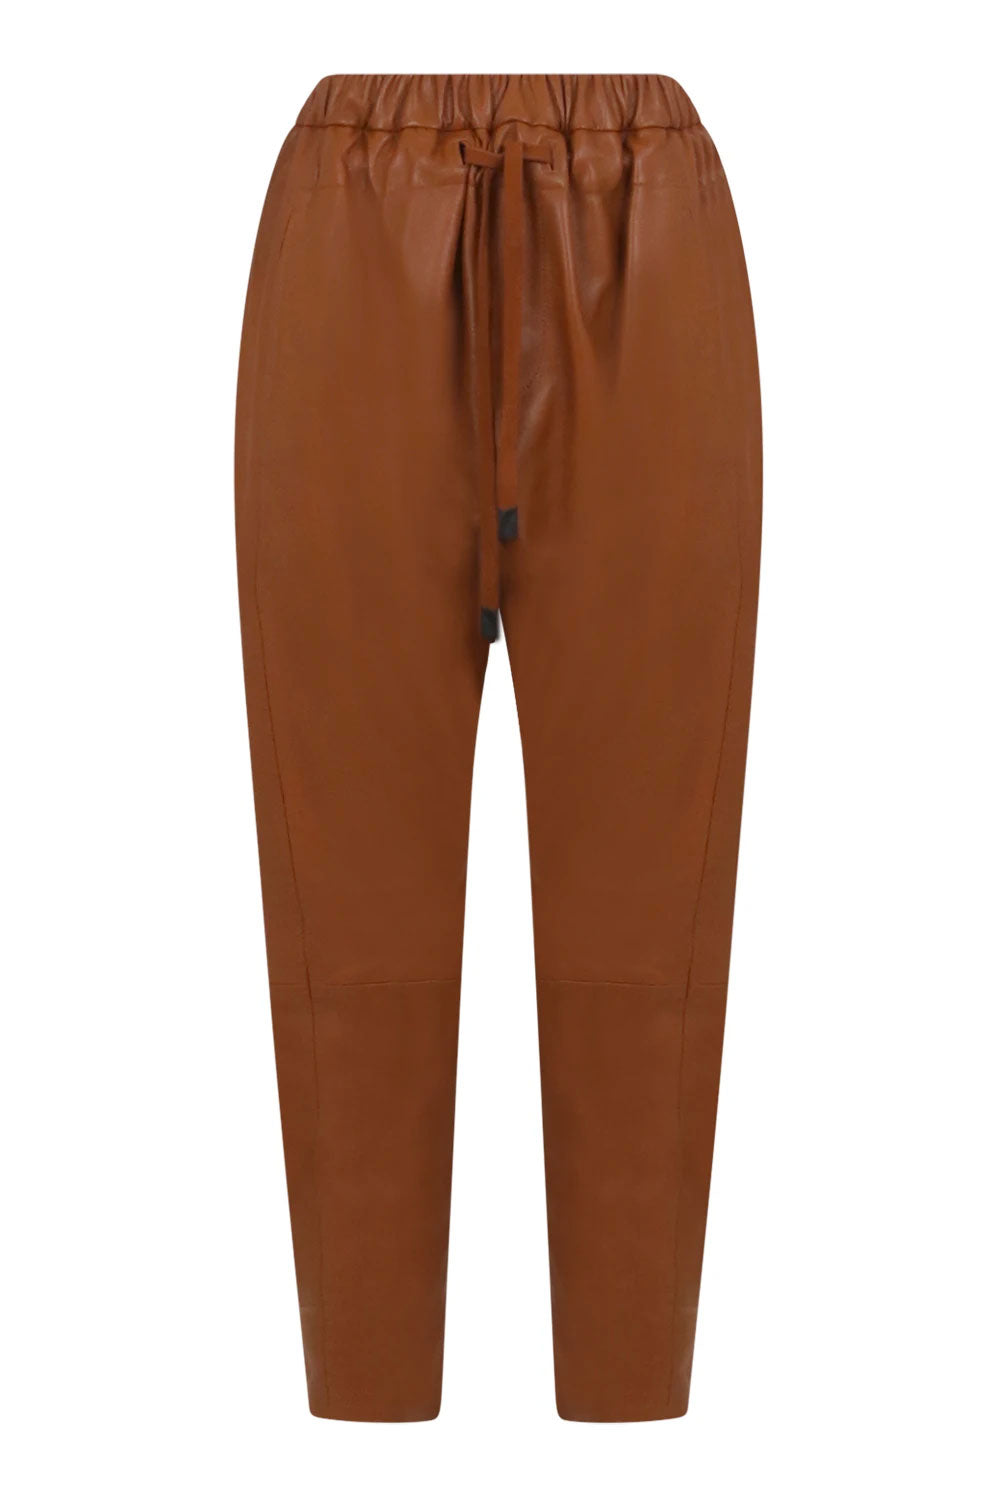 BASSIKE RTW ORIGINAL RELAXED LEATHER PANT TAN